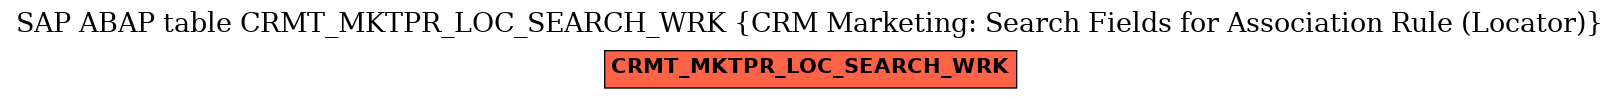 E-R Diagram for table CRMT_MKTPR_LOC_SEARCH_WRK (CRM Marketing: Search Fields for Association Rule (Locator))